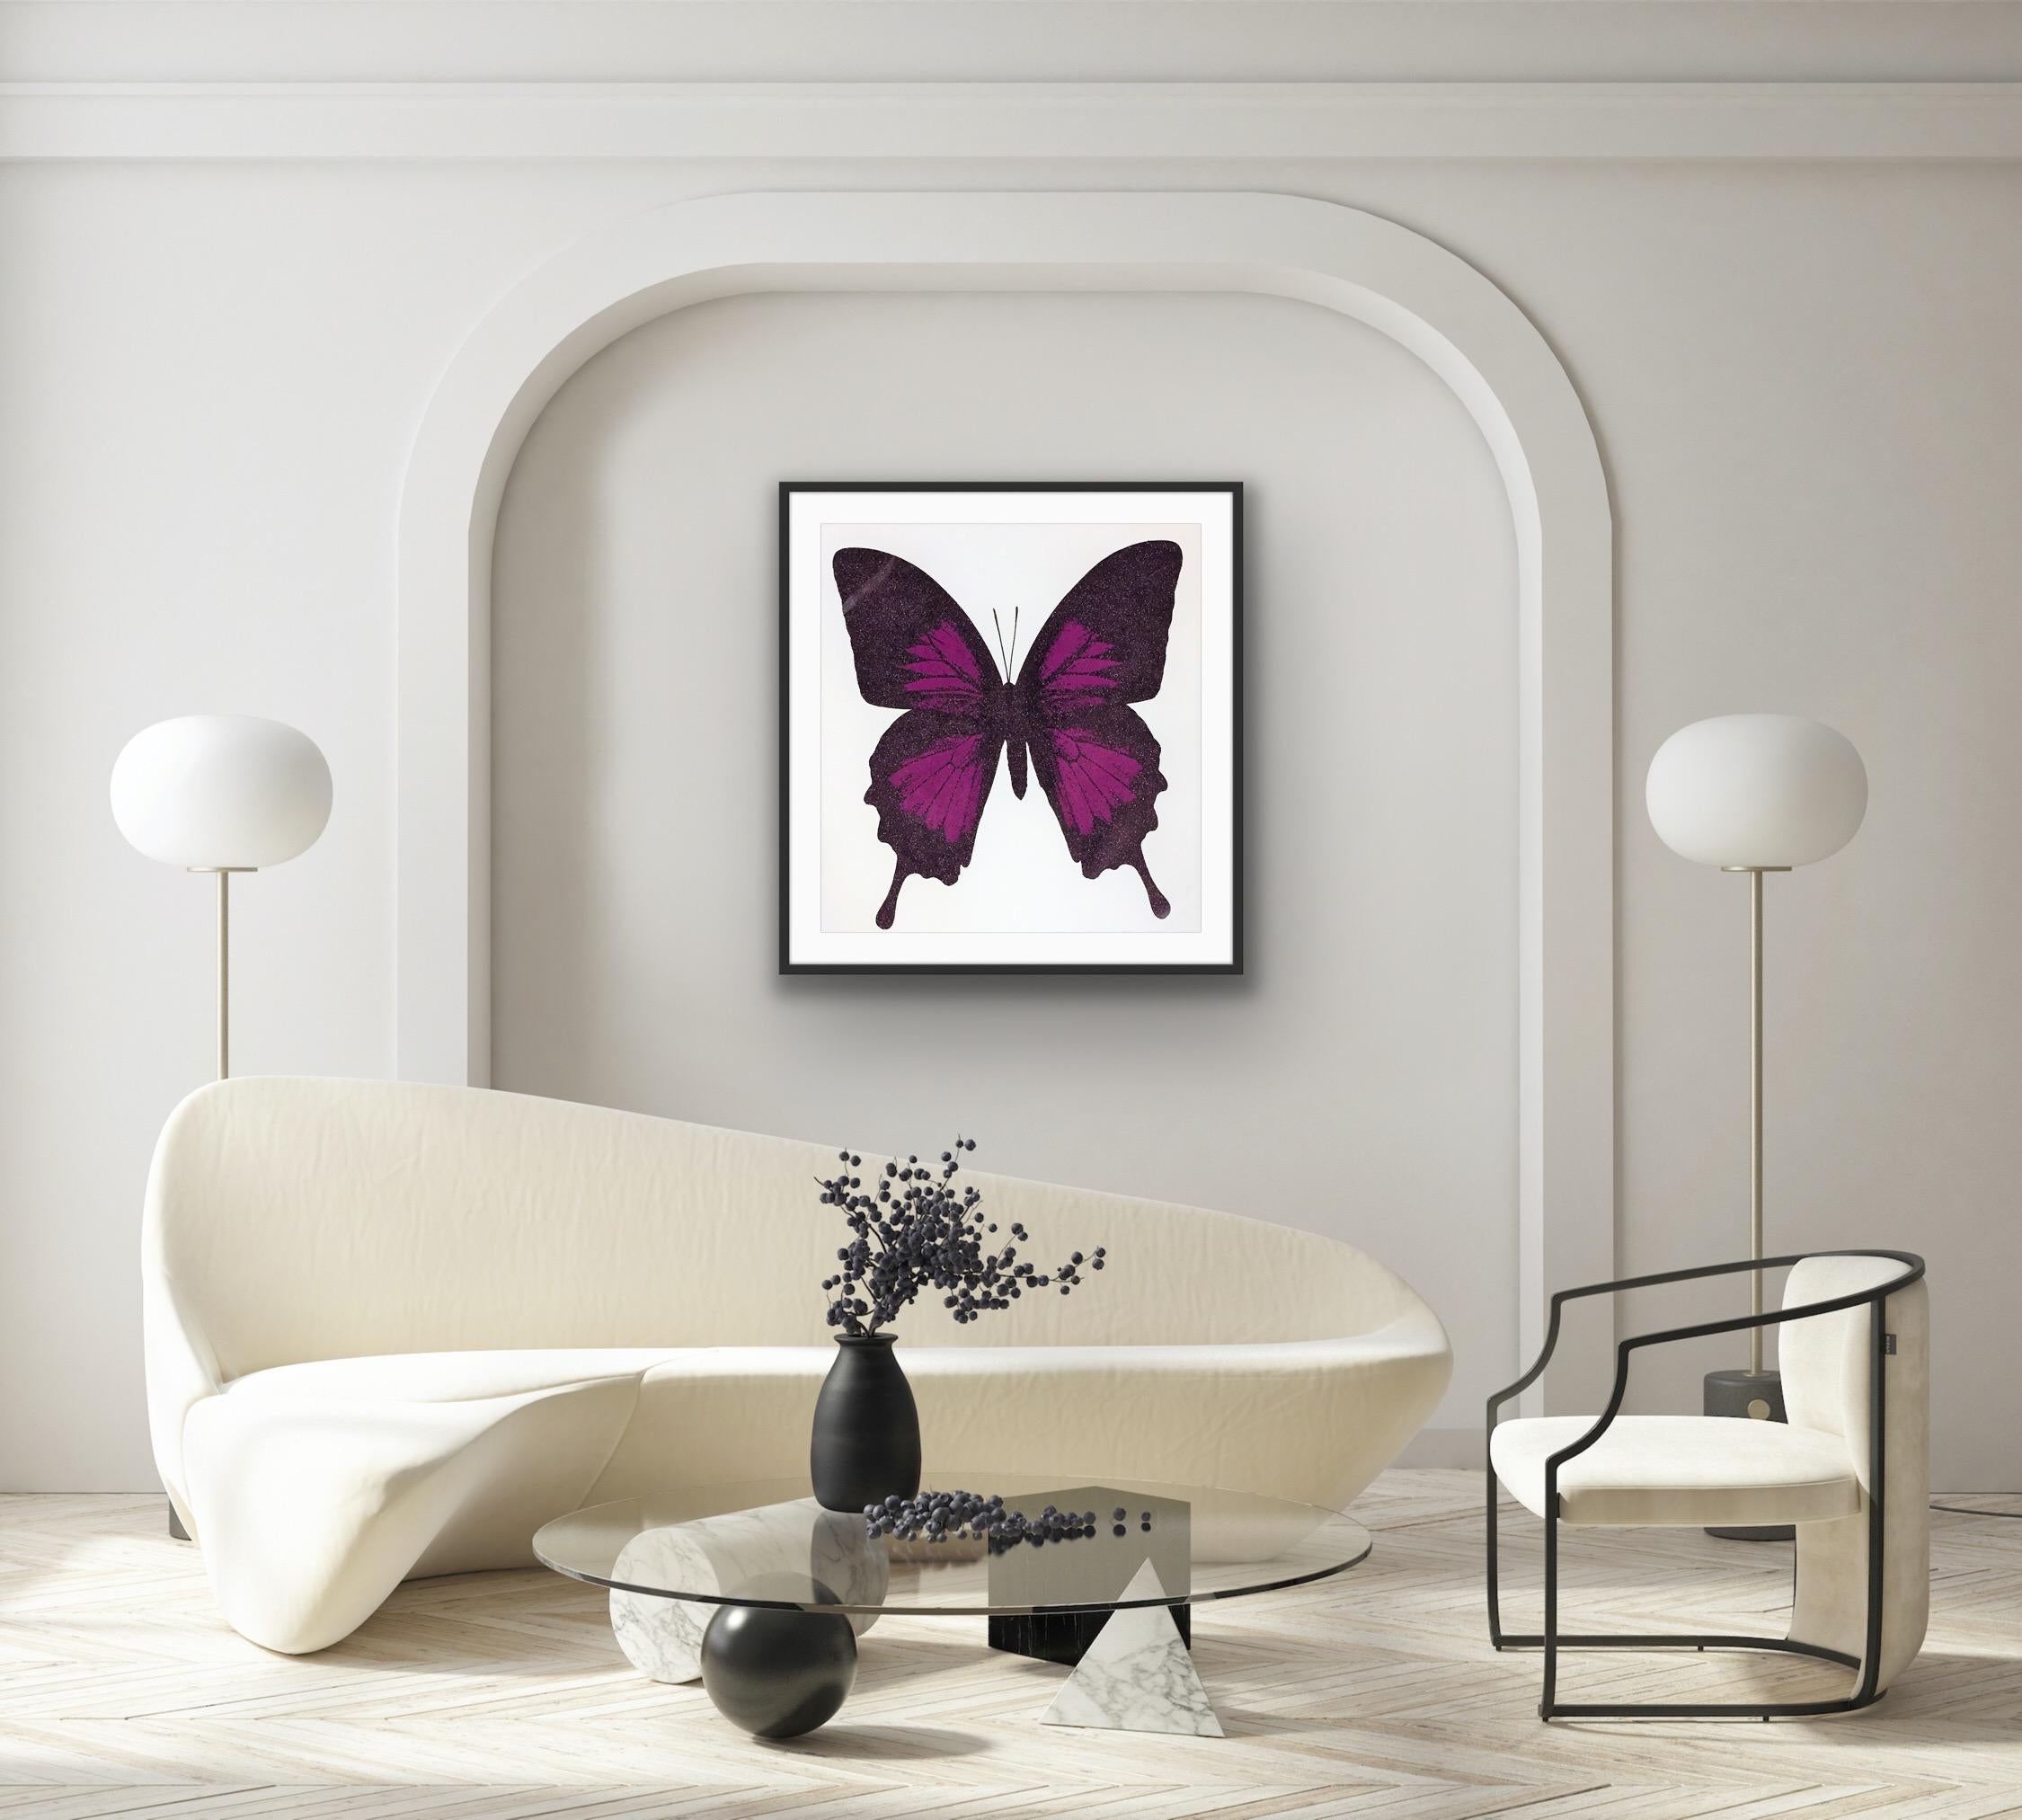 A purple butterfly print with diamond dust. A purple butterfly appears in front of a white background.

Additional information:
Claire Robinson: Papilio Ulysses - Aubergine.
Foam on Dust
Limited edition screen print in an edition of 10.
Sold